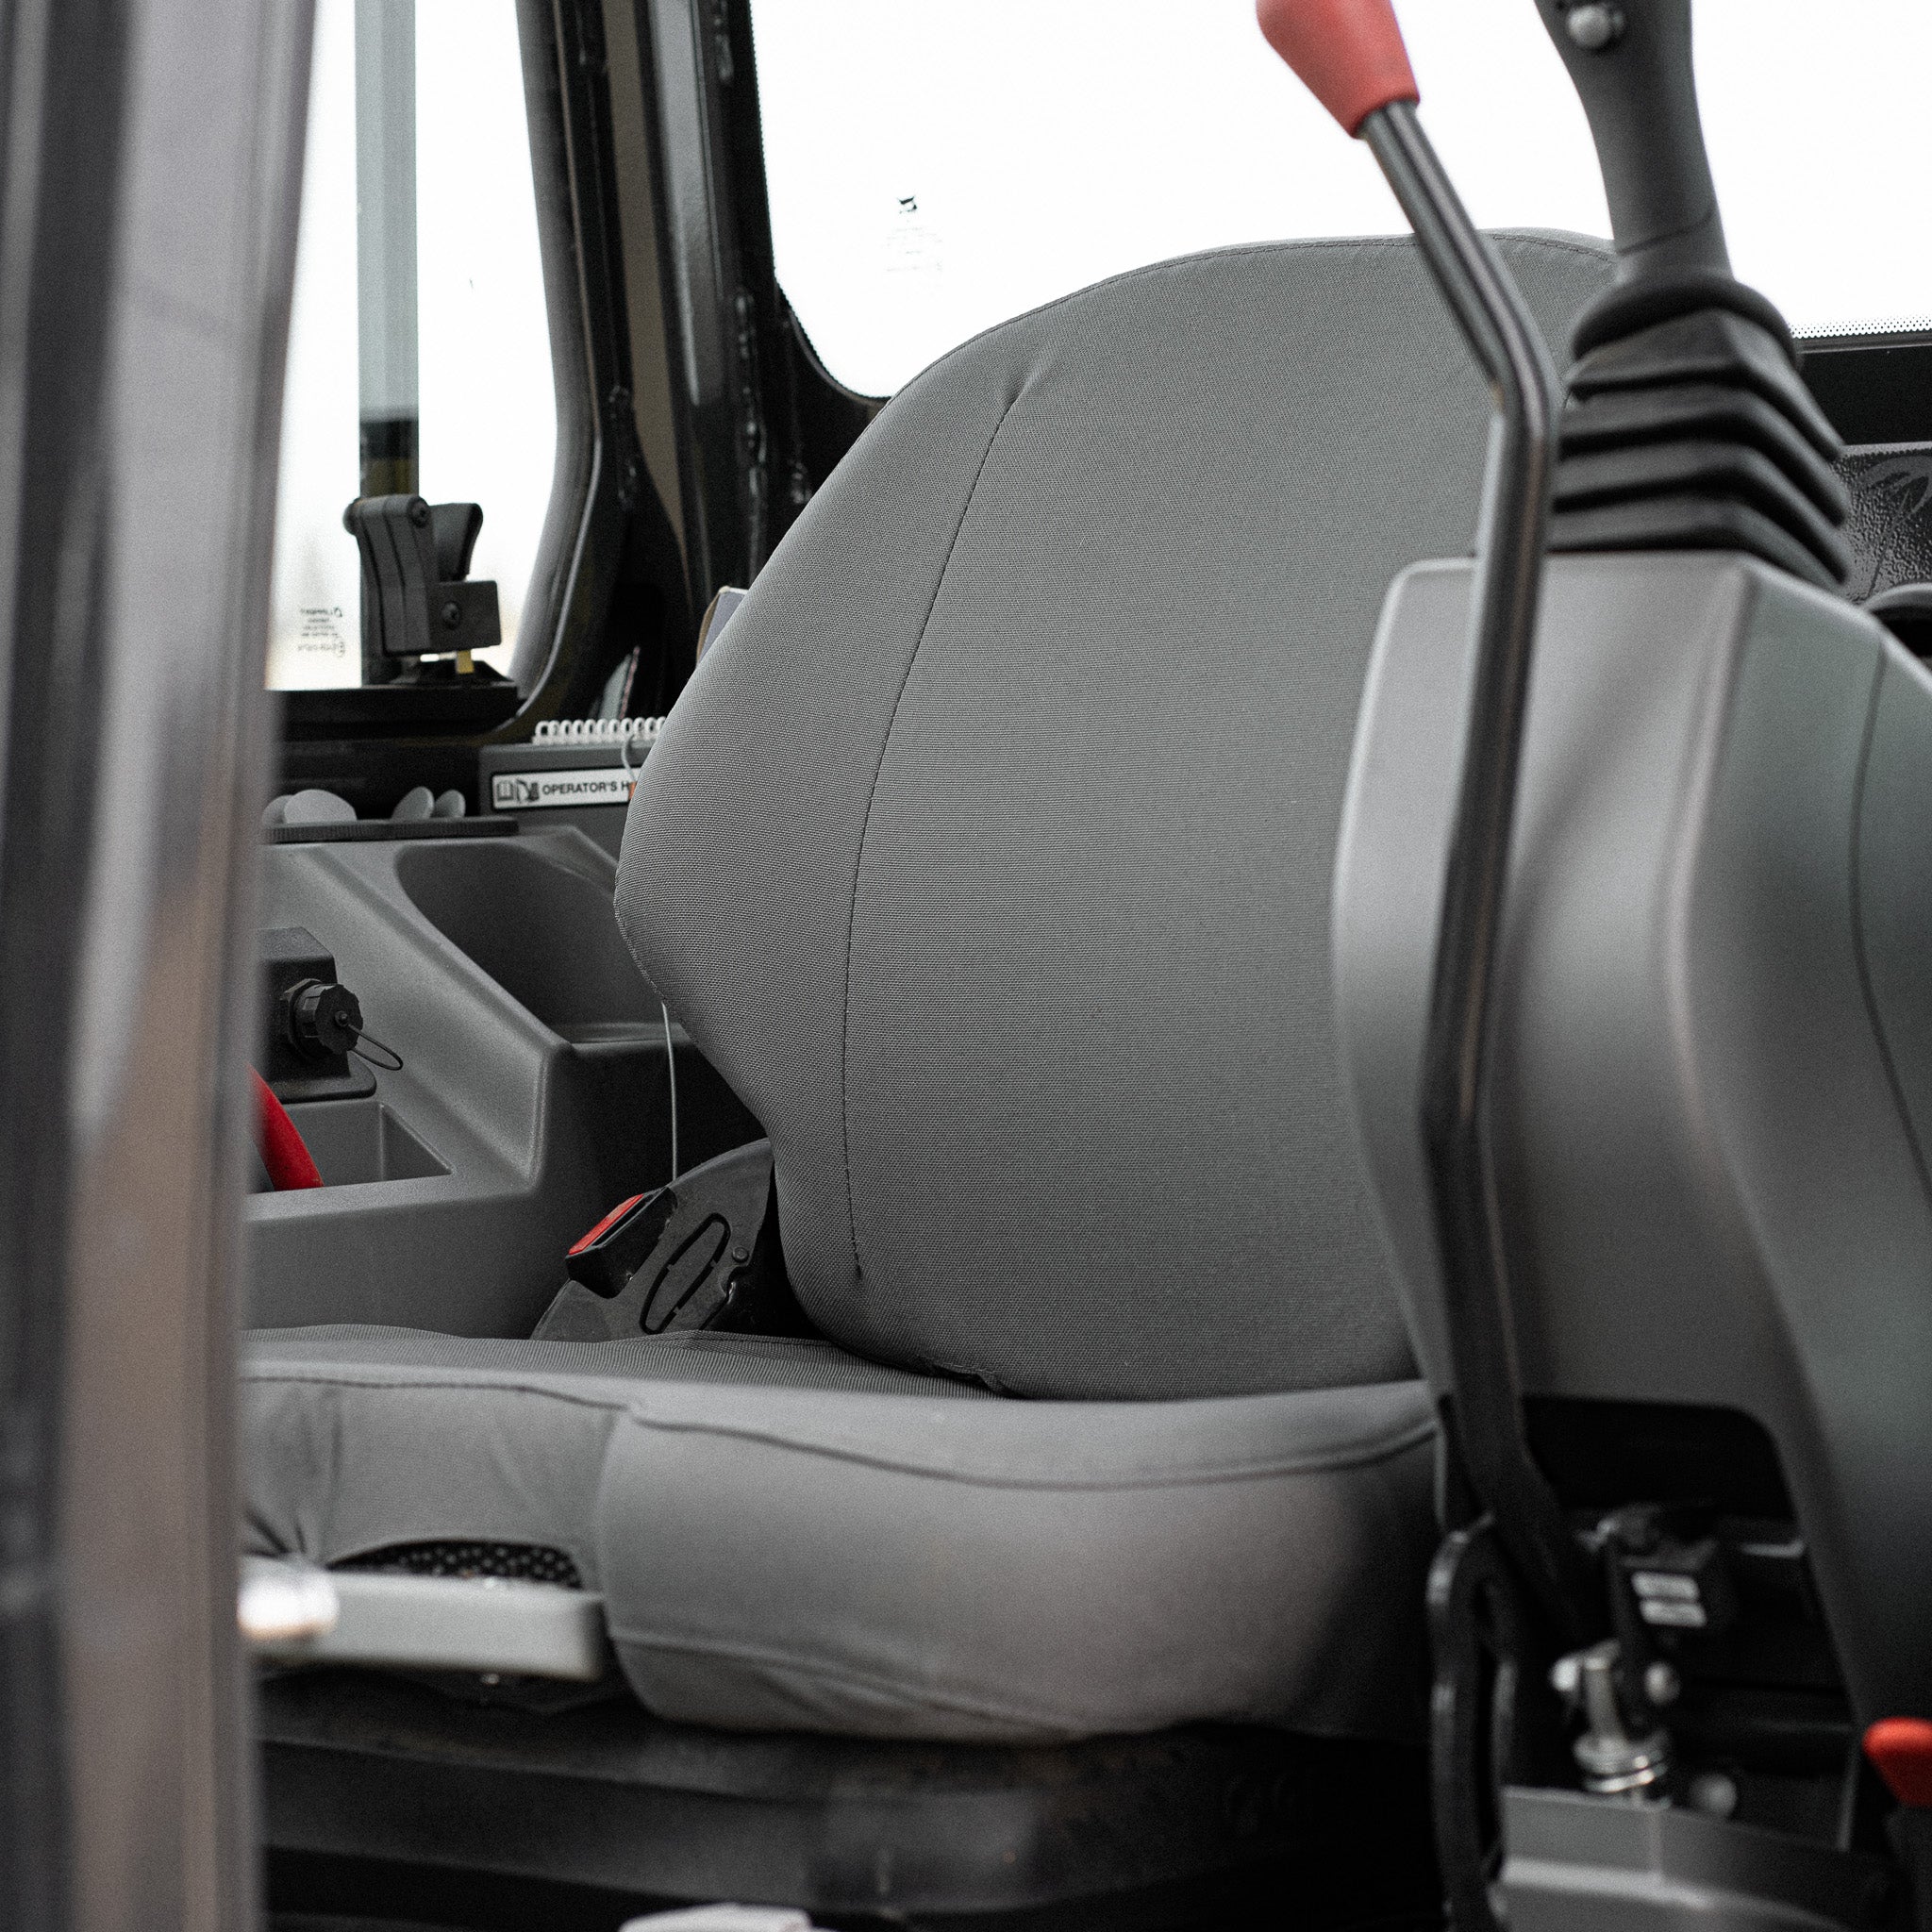 TigerTough Seat Cover E82250 on a Bobcat mini excavator. The seat cover in this picture is gray.